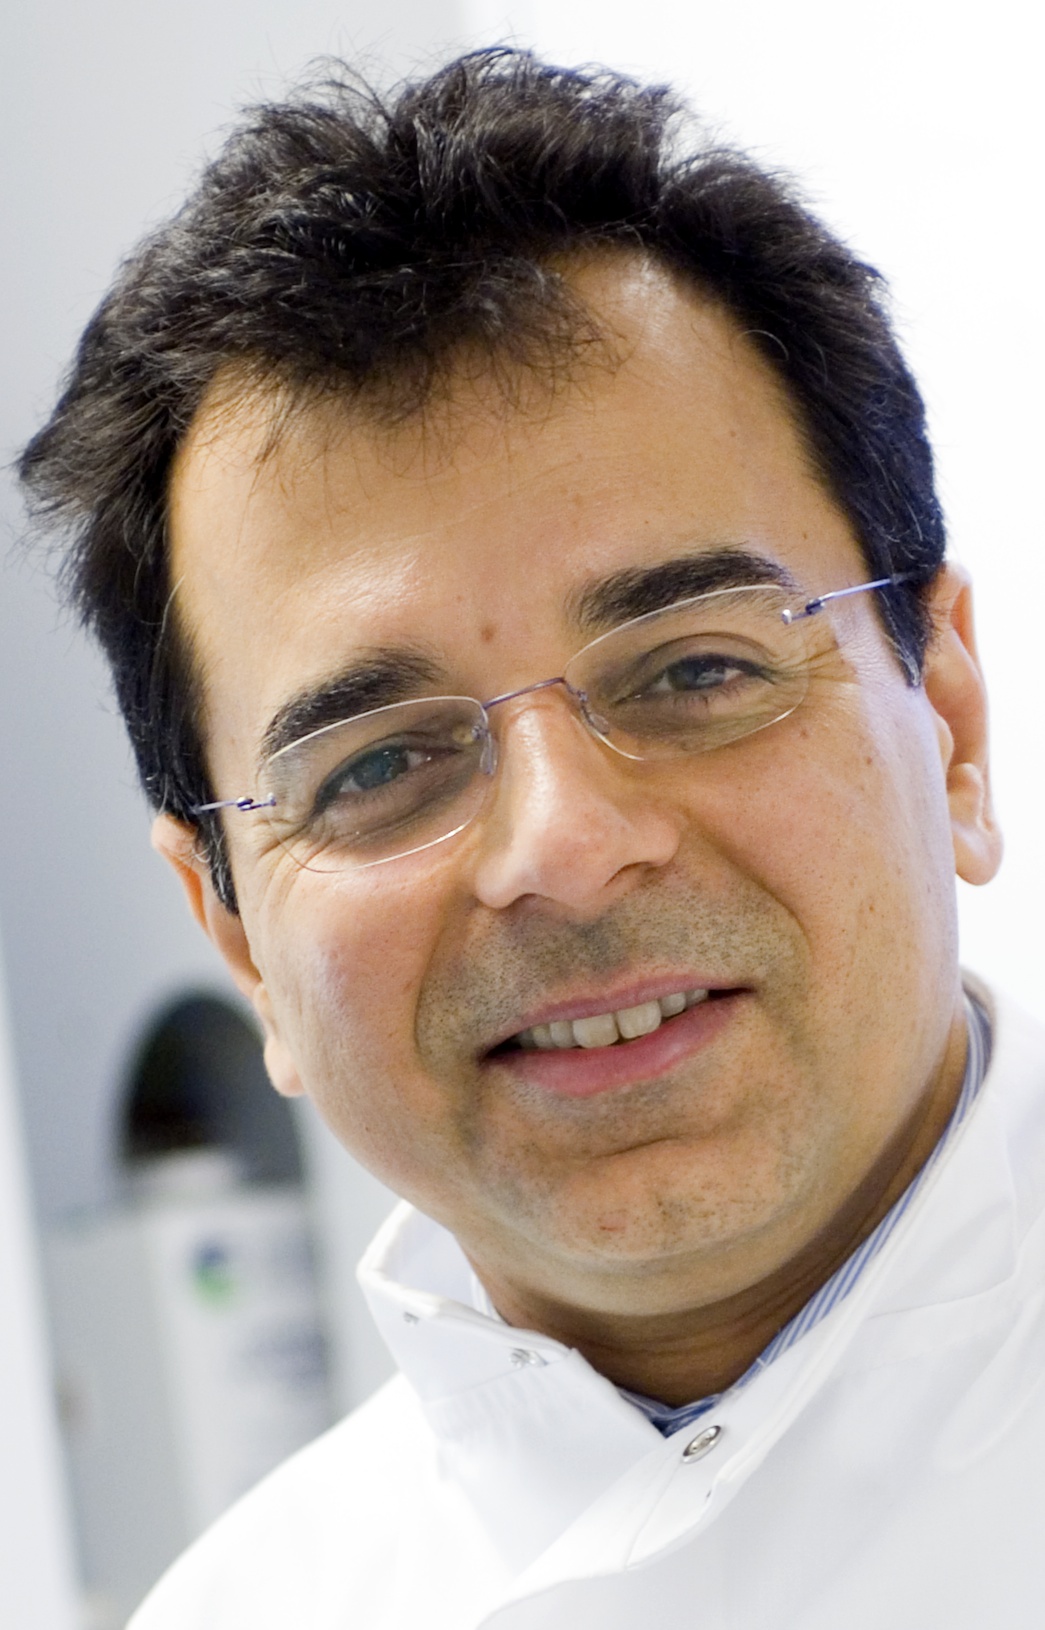 Professor Ajit Lalvani from the National Heart and Lung Institute at Imperial College London, who led the study. Photo credit: Dave Guttridge/Imperial College London